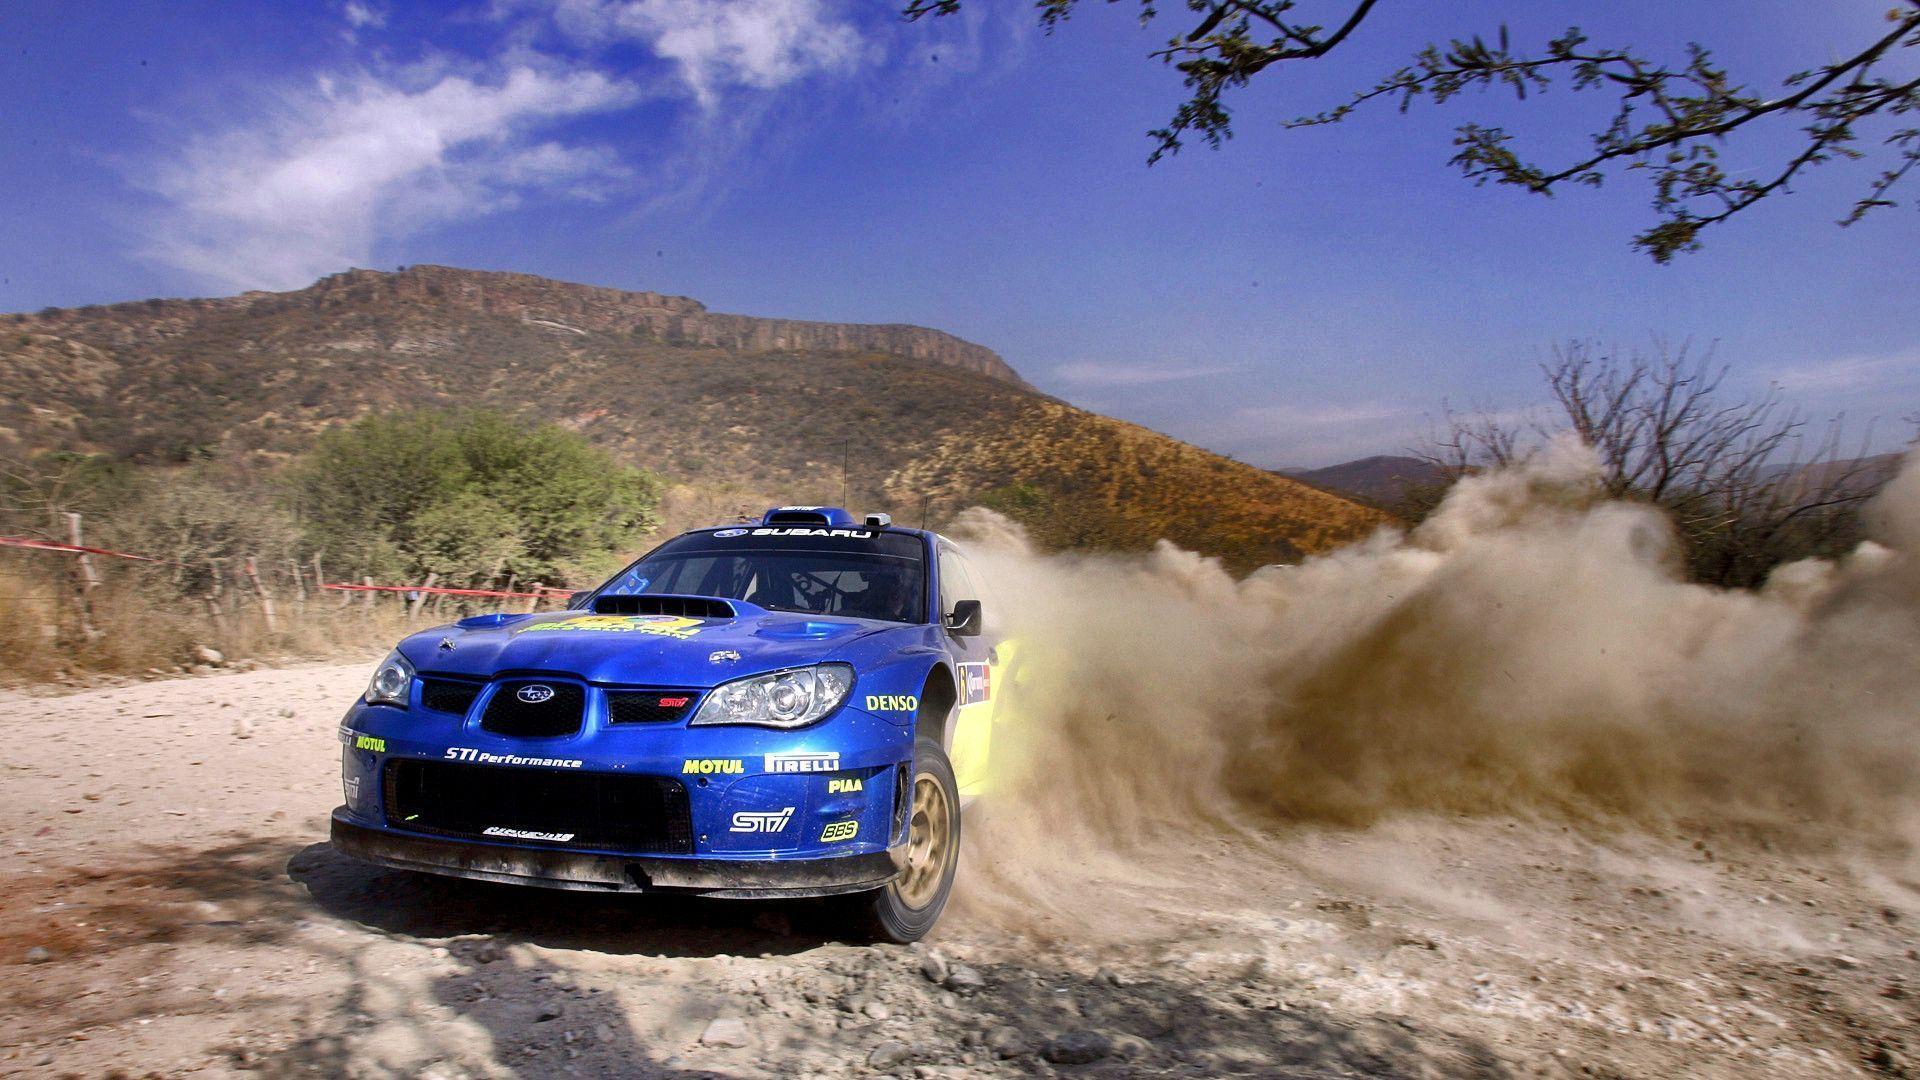 Download Rally Wallpaper 14697 1920x1080 px High Resolution